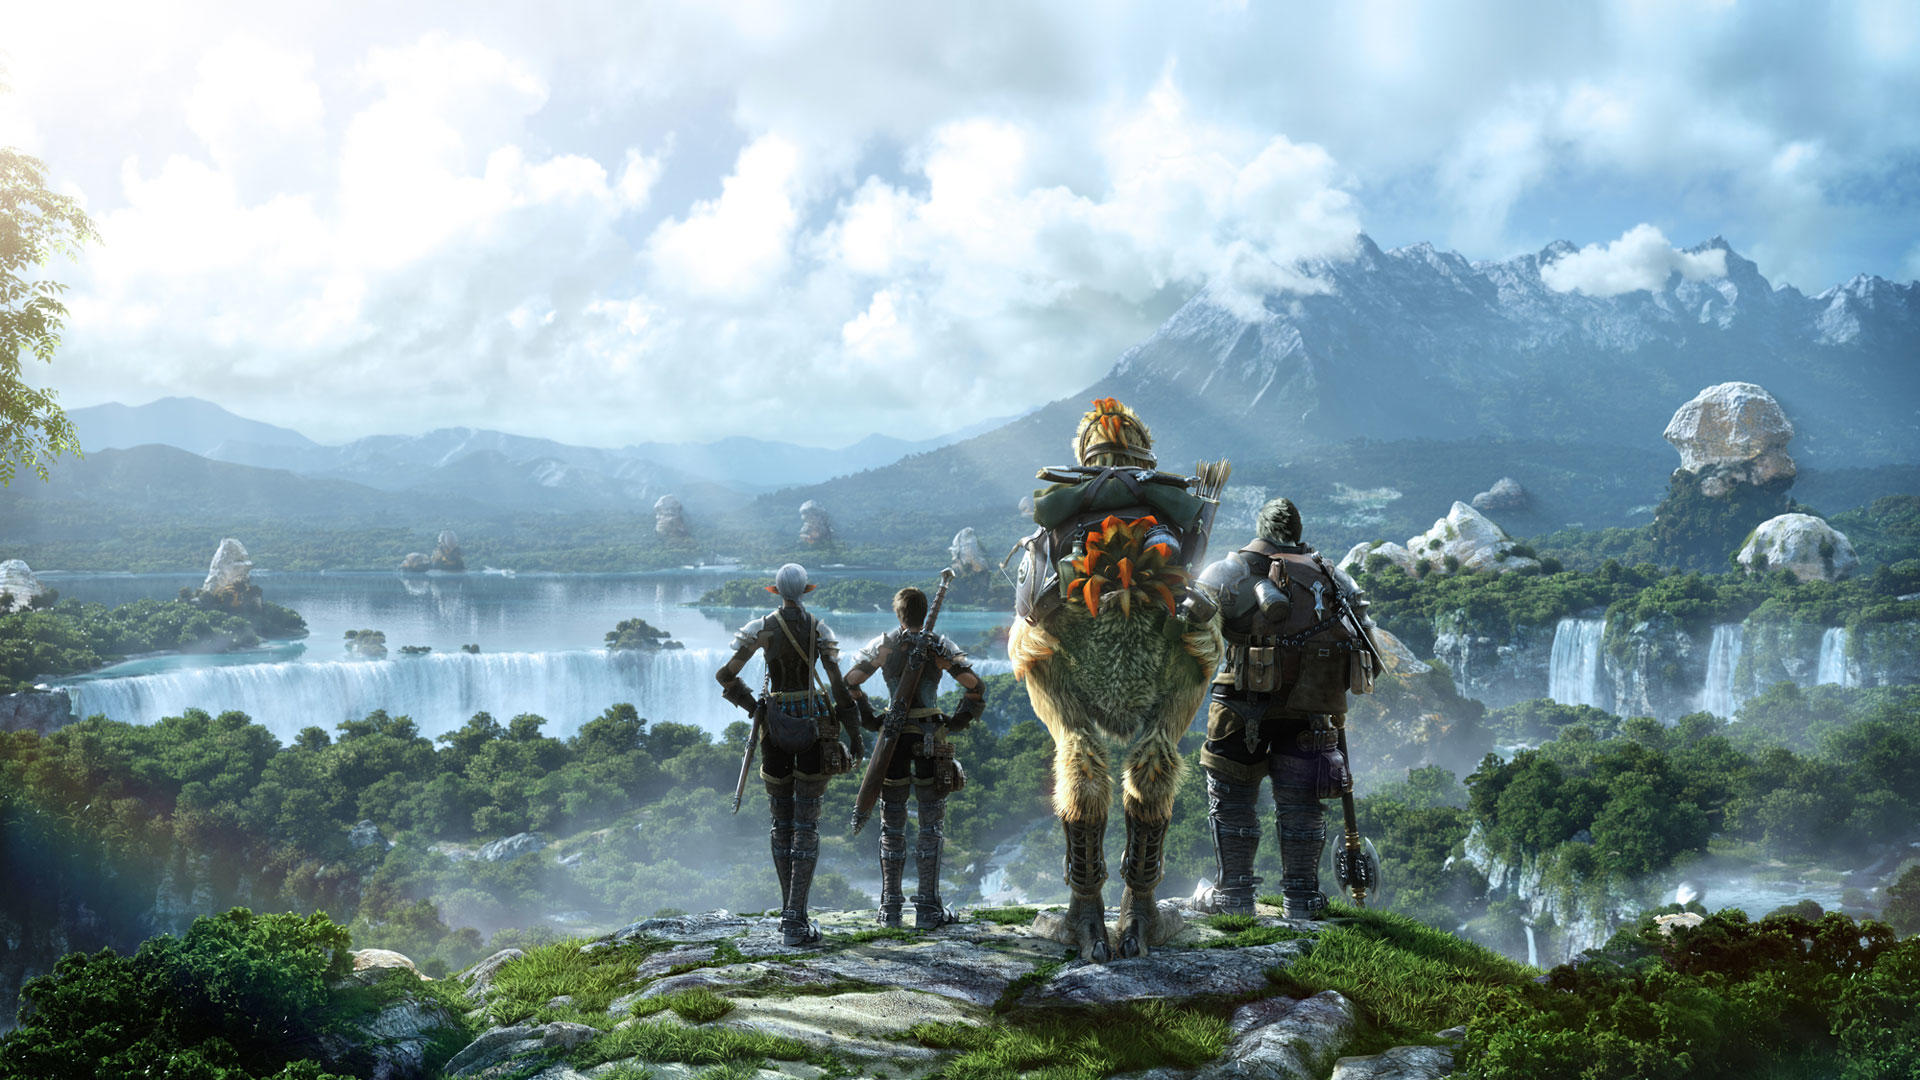 Final Fantasy XIV Might Be Coming To XBox One